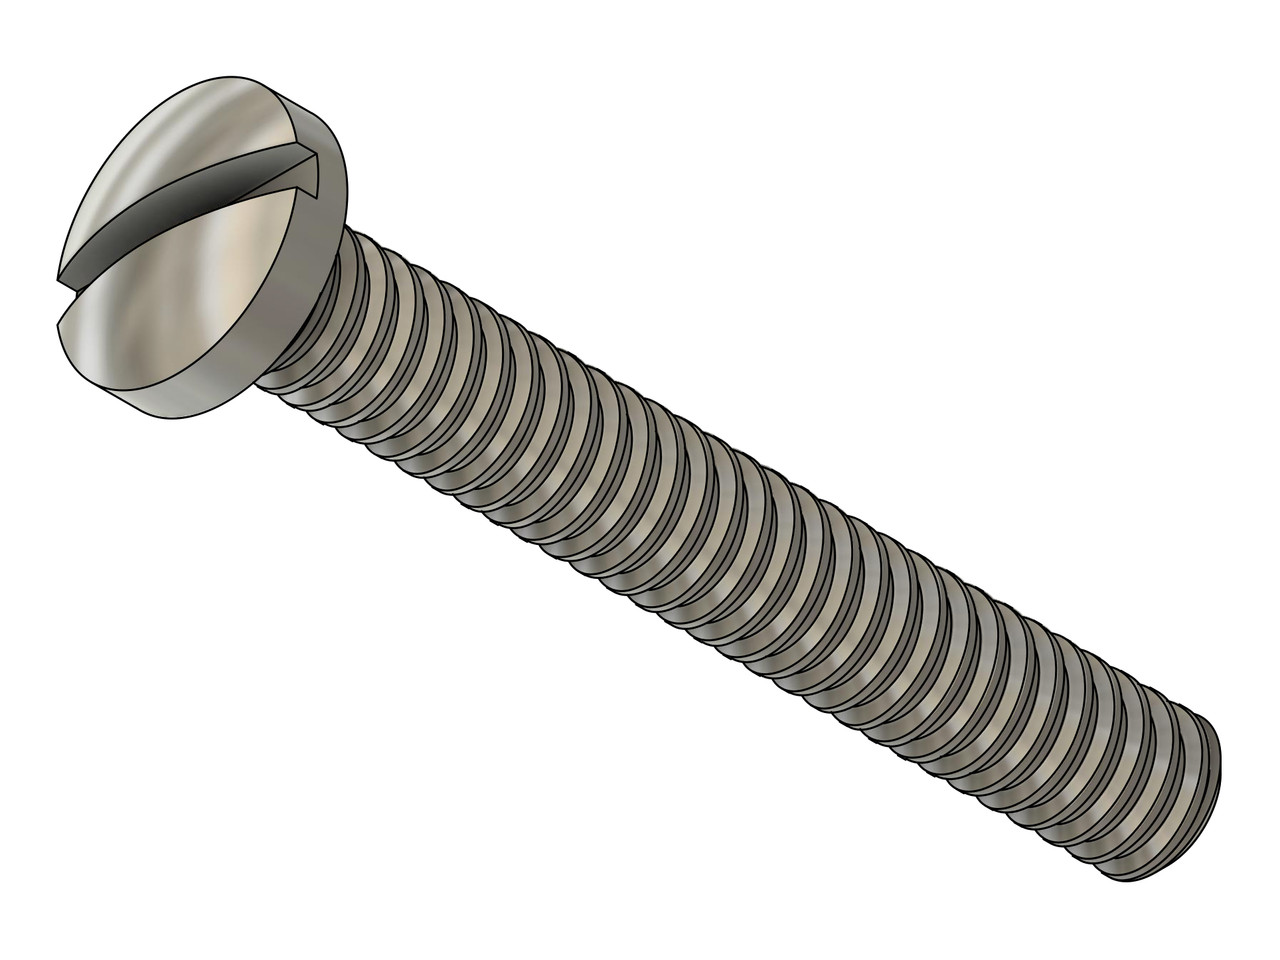 Machine Screw Modified Pan Head
Thread M1.4 (1.40UNM)
Pitch .30mm
Head Diameter 2.5mm
Threaded Length 9.7mm (3/8")
Overall Length 10.5mm
Material Stainless Steel, Finish Color Silver
Price is for 100 count package